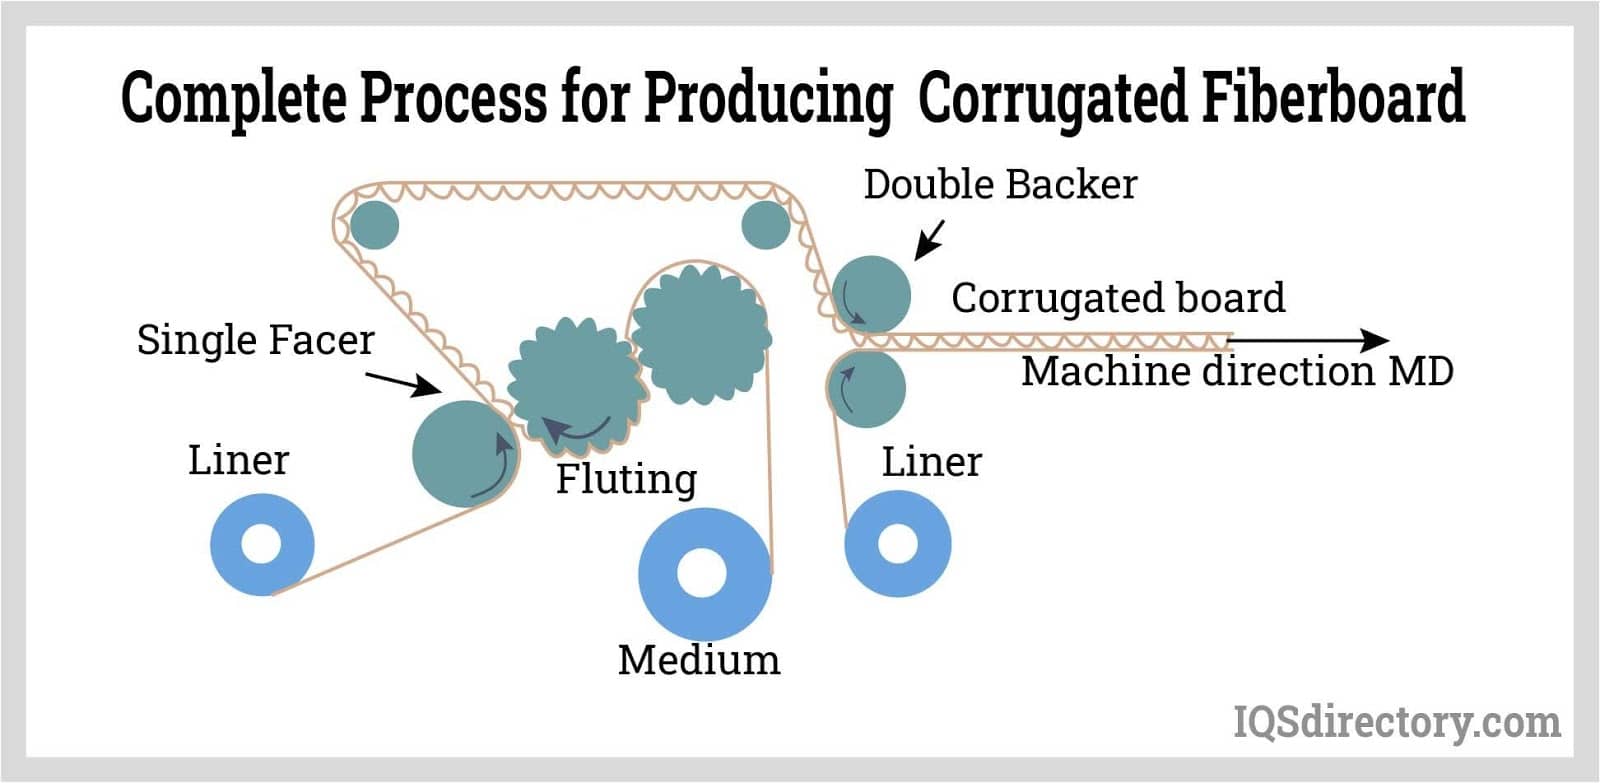 Complete Process for Producing Corrugated Fiberboard